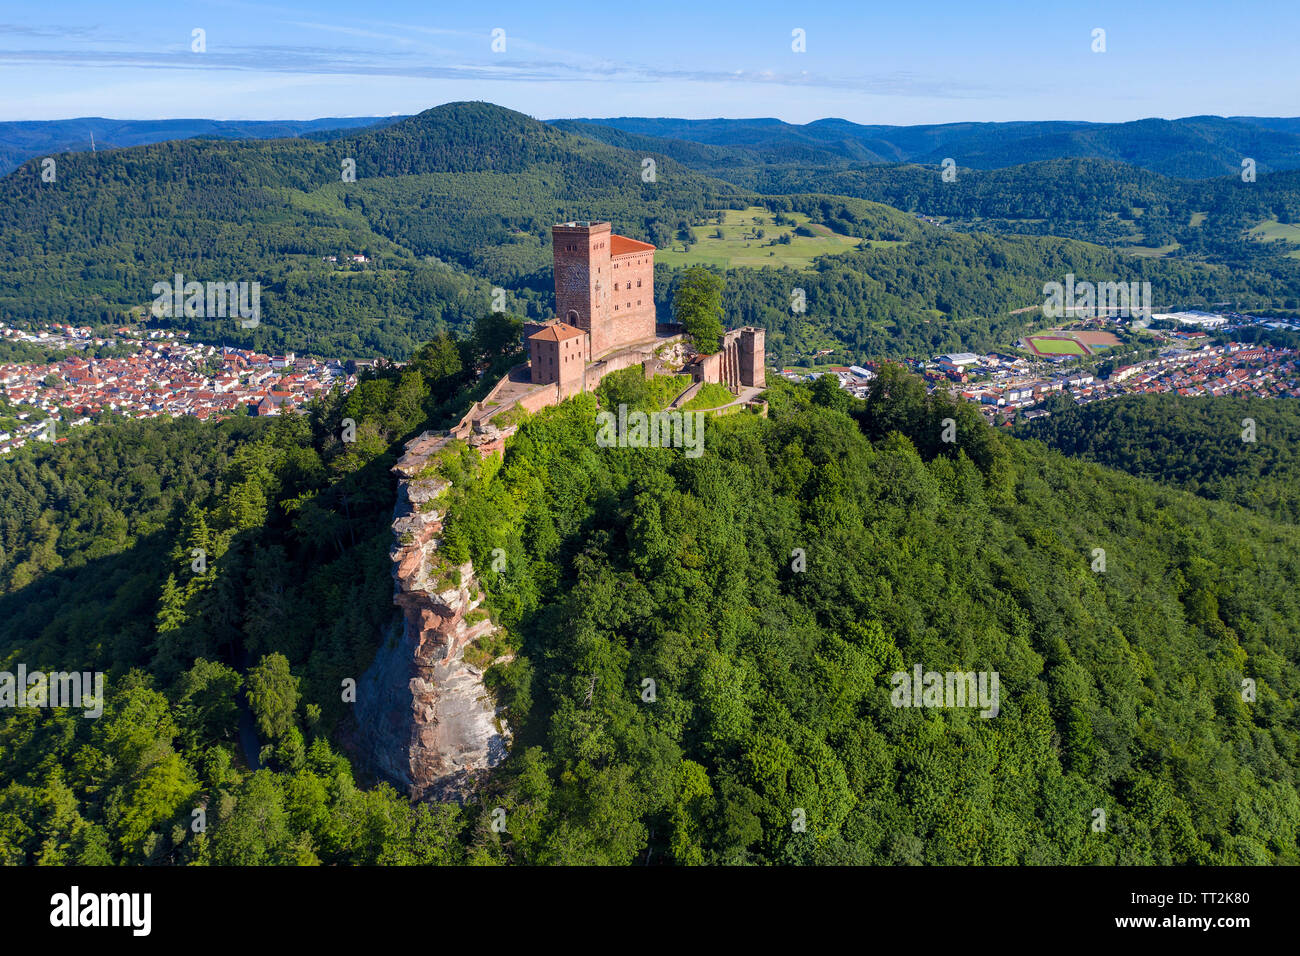 Aerial view of the Imperial castle Trifels, where Richard the Lionheart was imprisoned,  Annweiler at Trifels, Rhineland-Palatinate, Germany Stock Photo